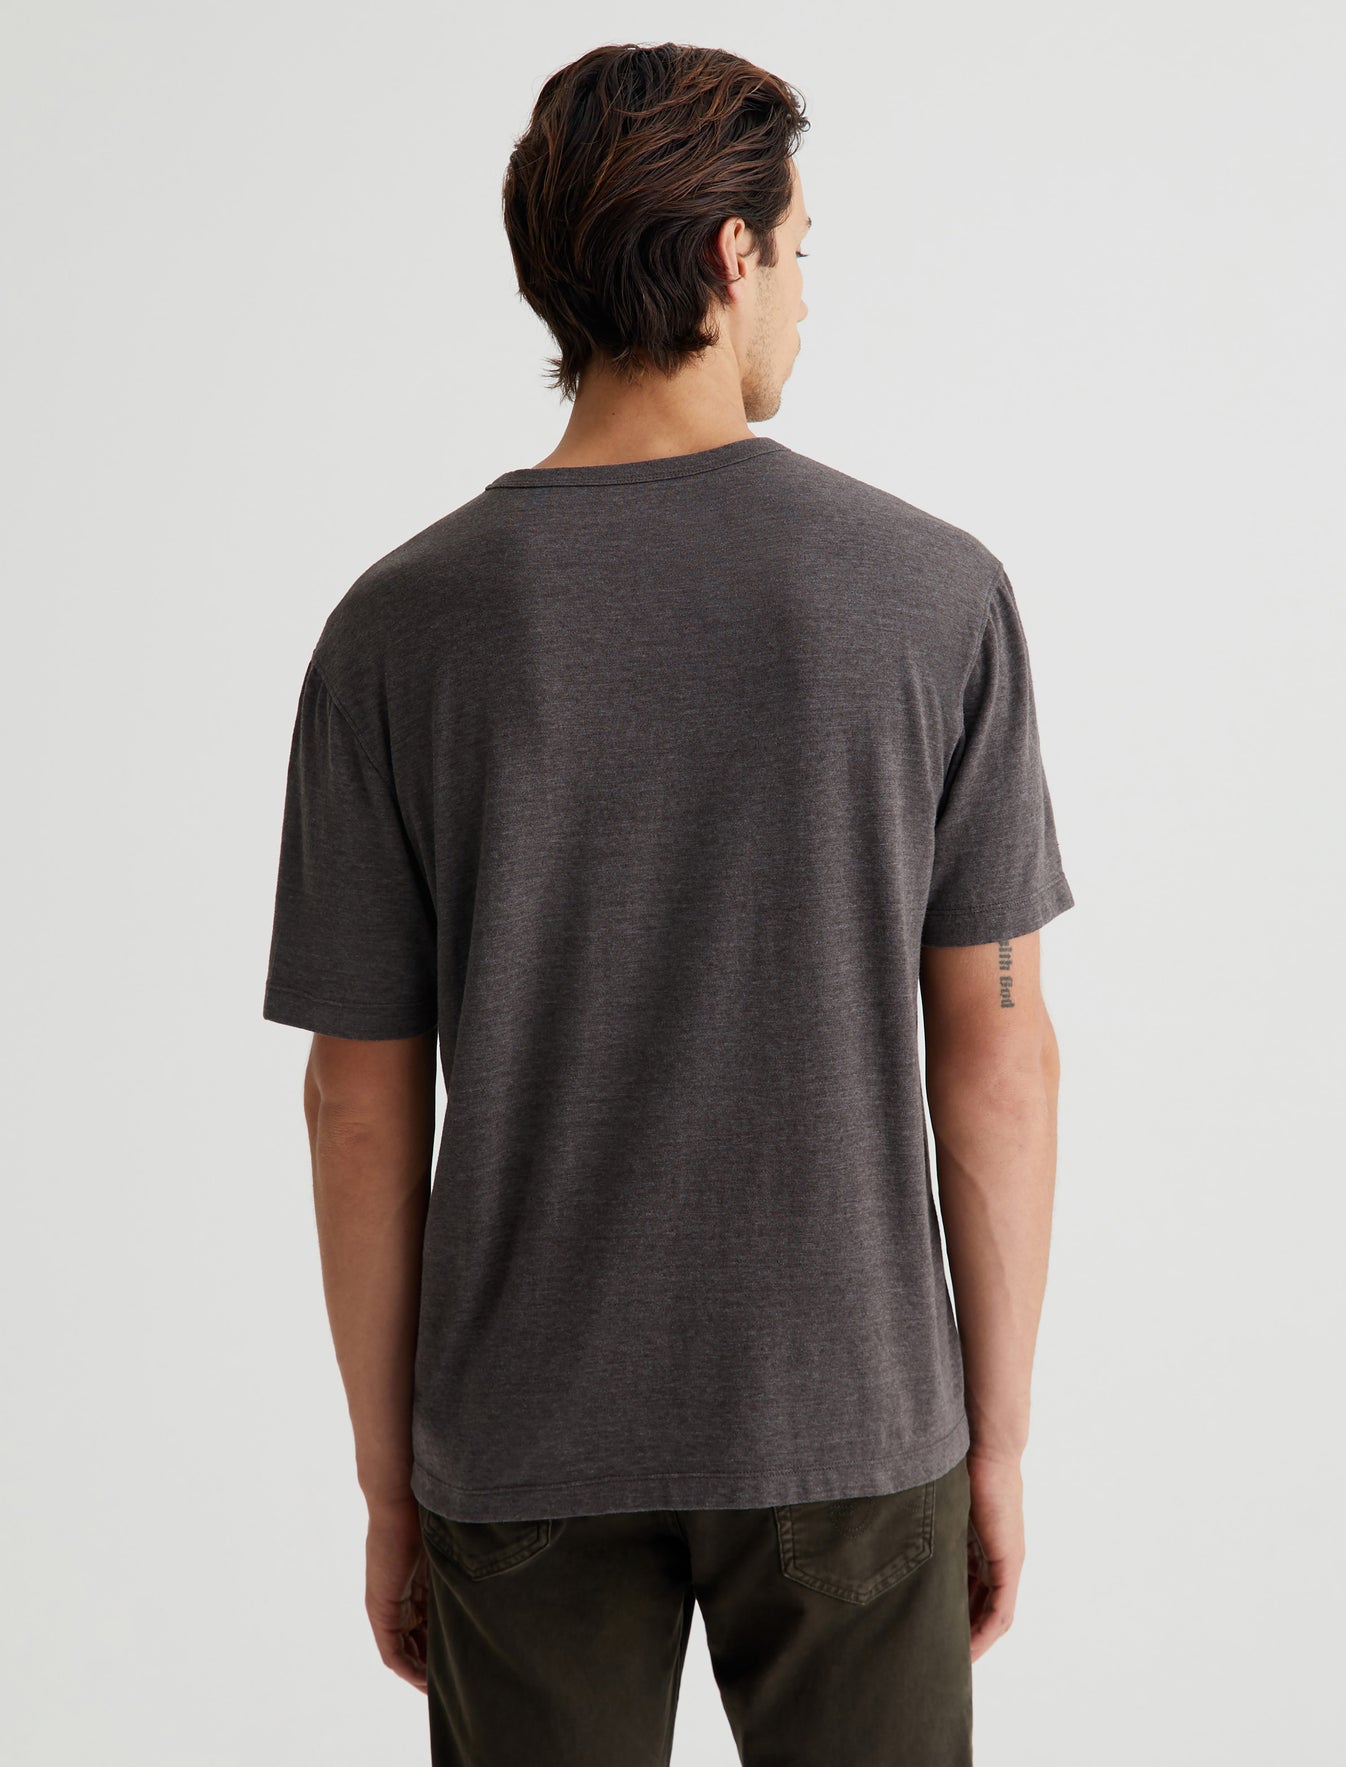 Wesley Crew Stone Brown Relaxed T-Shirt Men Top Photo 6